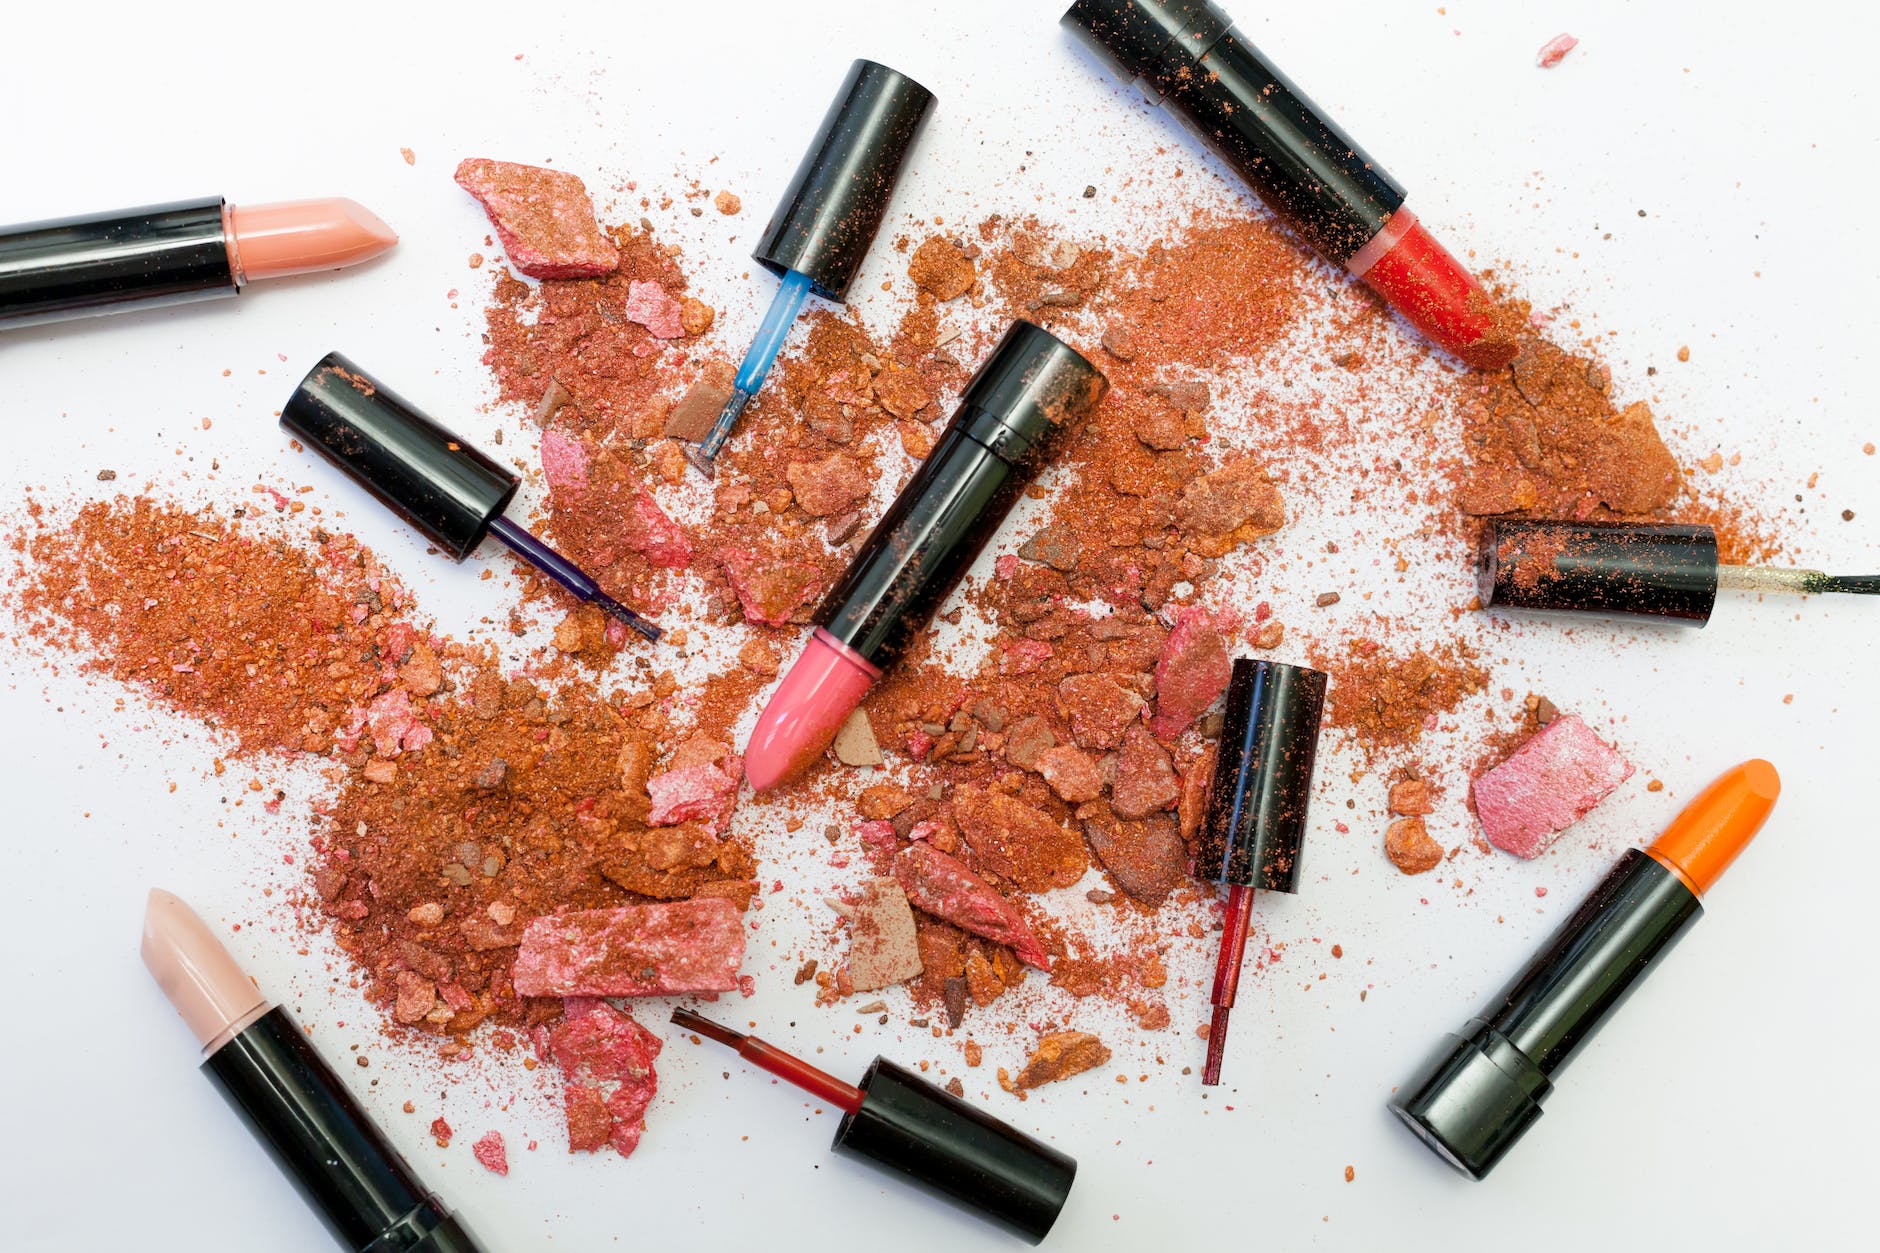 Toxic Ingredients that Might Be Present in Your Makeup